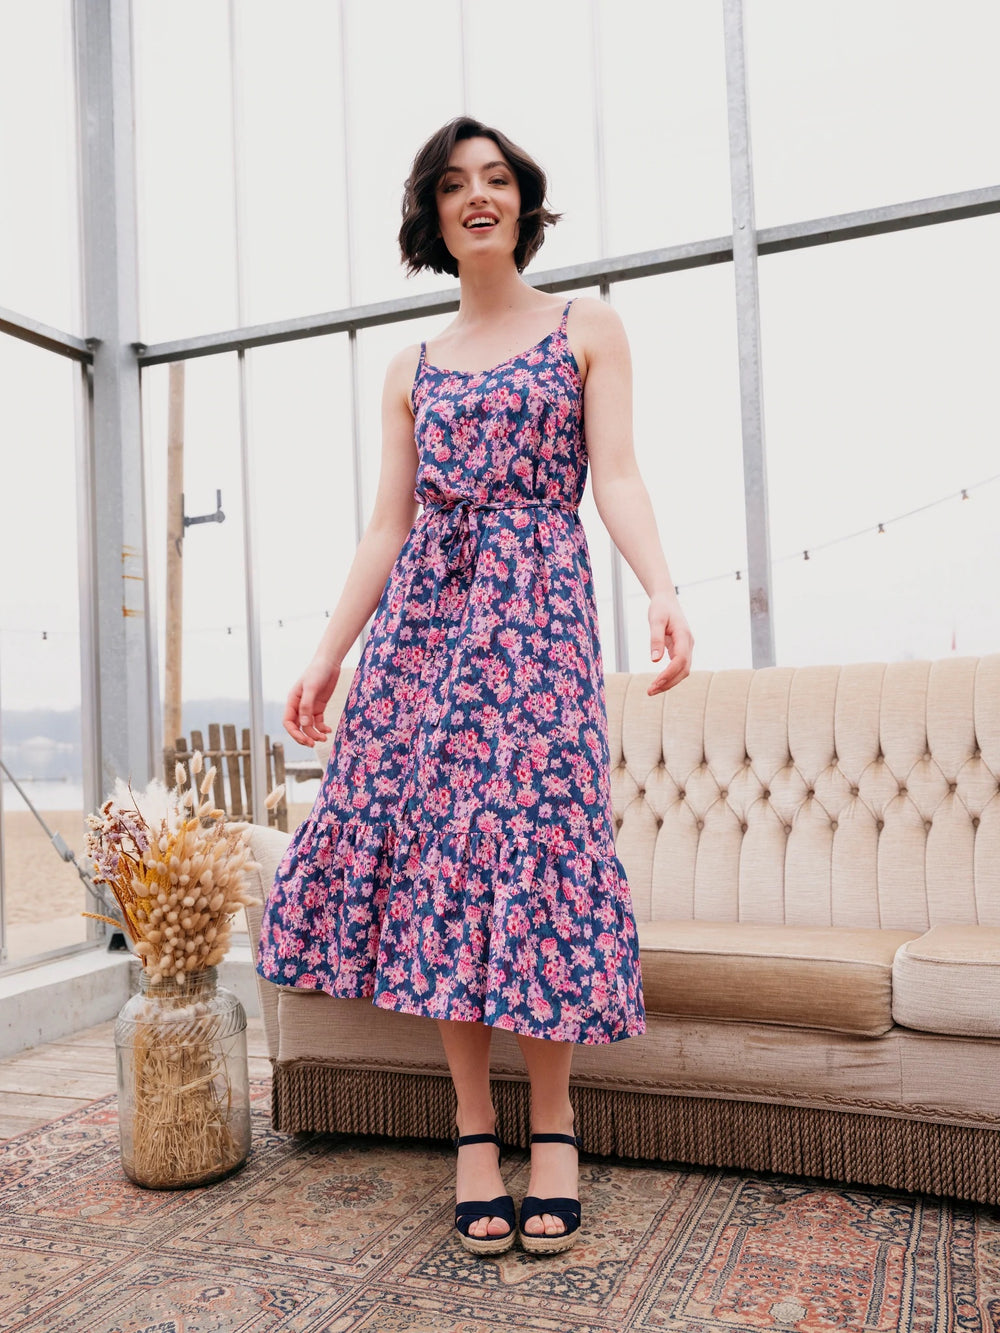 Woman wearing the Chloe Sundress sewing pattern from Atelier Jupe on The Fold Line. A sundress pattern made in viscose, tencel, cotton or linen fabrics, featuring spaghetti shoulder straps, cross back straps, elasticated back, bust darts, tiered hem and m